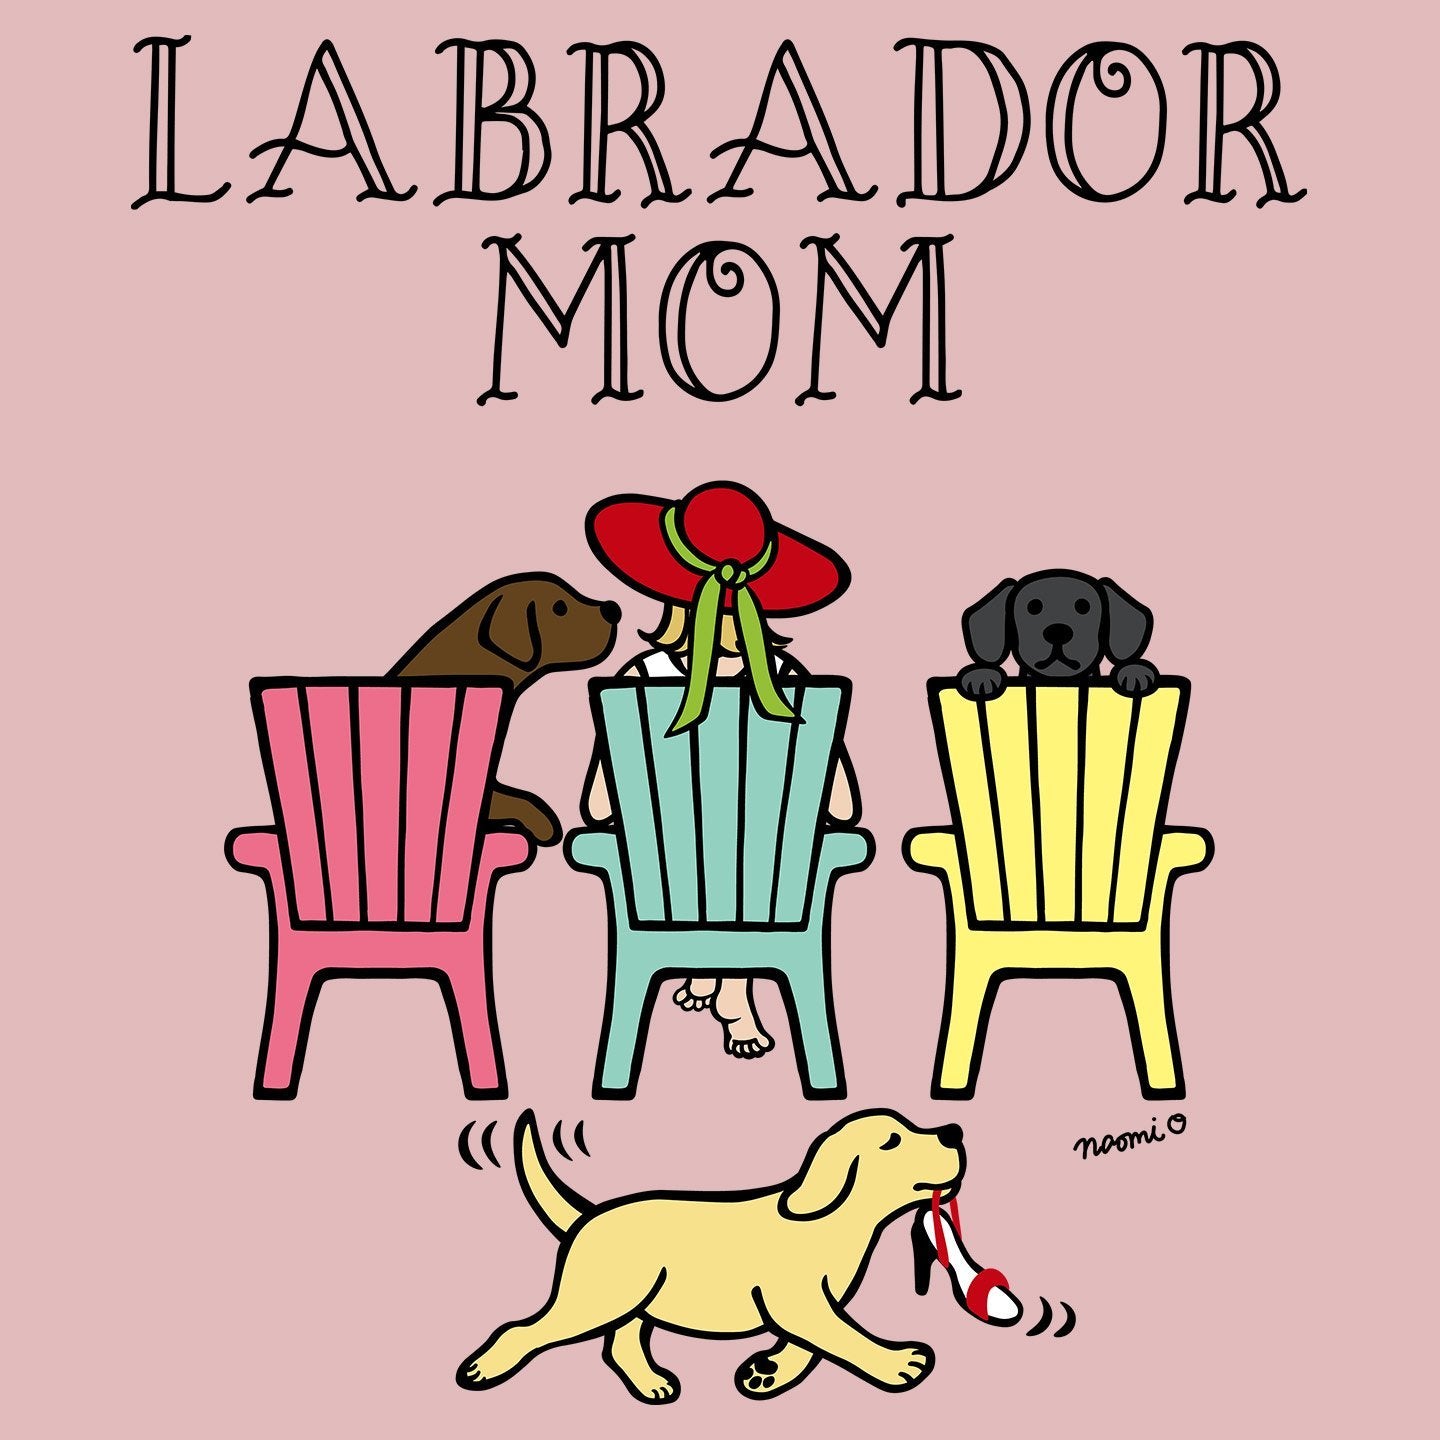 Labrador Dog Mom - Deck Chairs Design - Women's Fitted T-Shirt